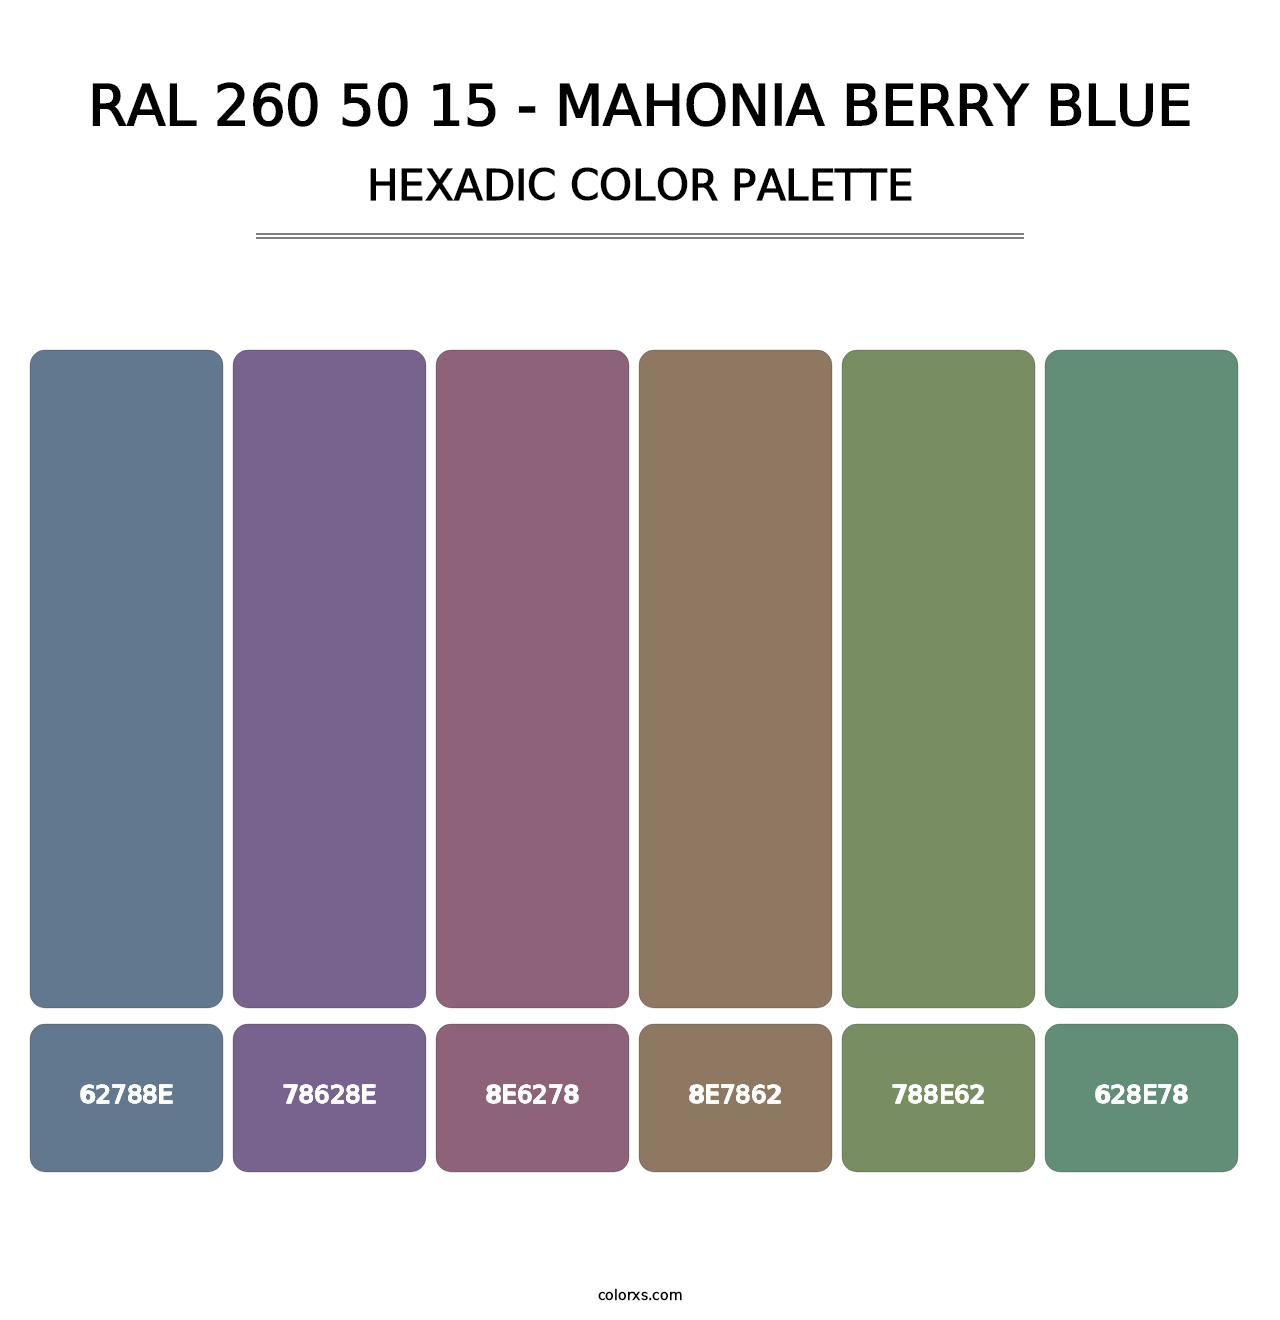 RAL 260 50 15 - Mahonia Berry Blue - Hexadic Color Palette